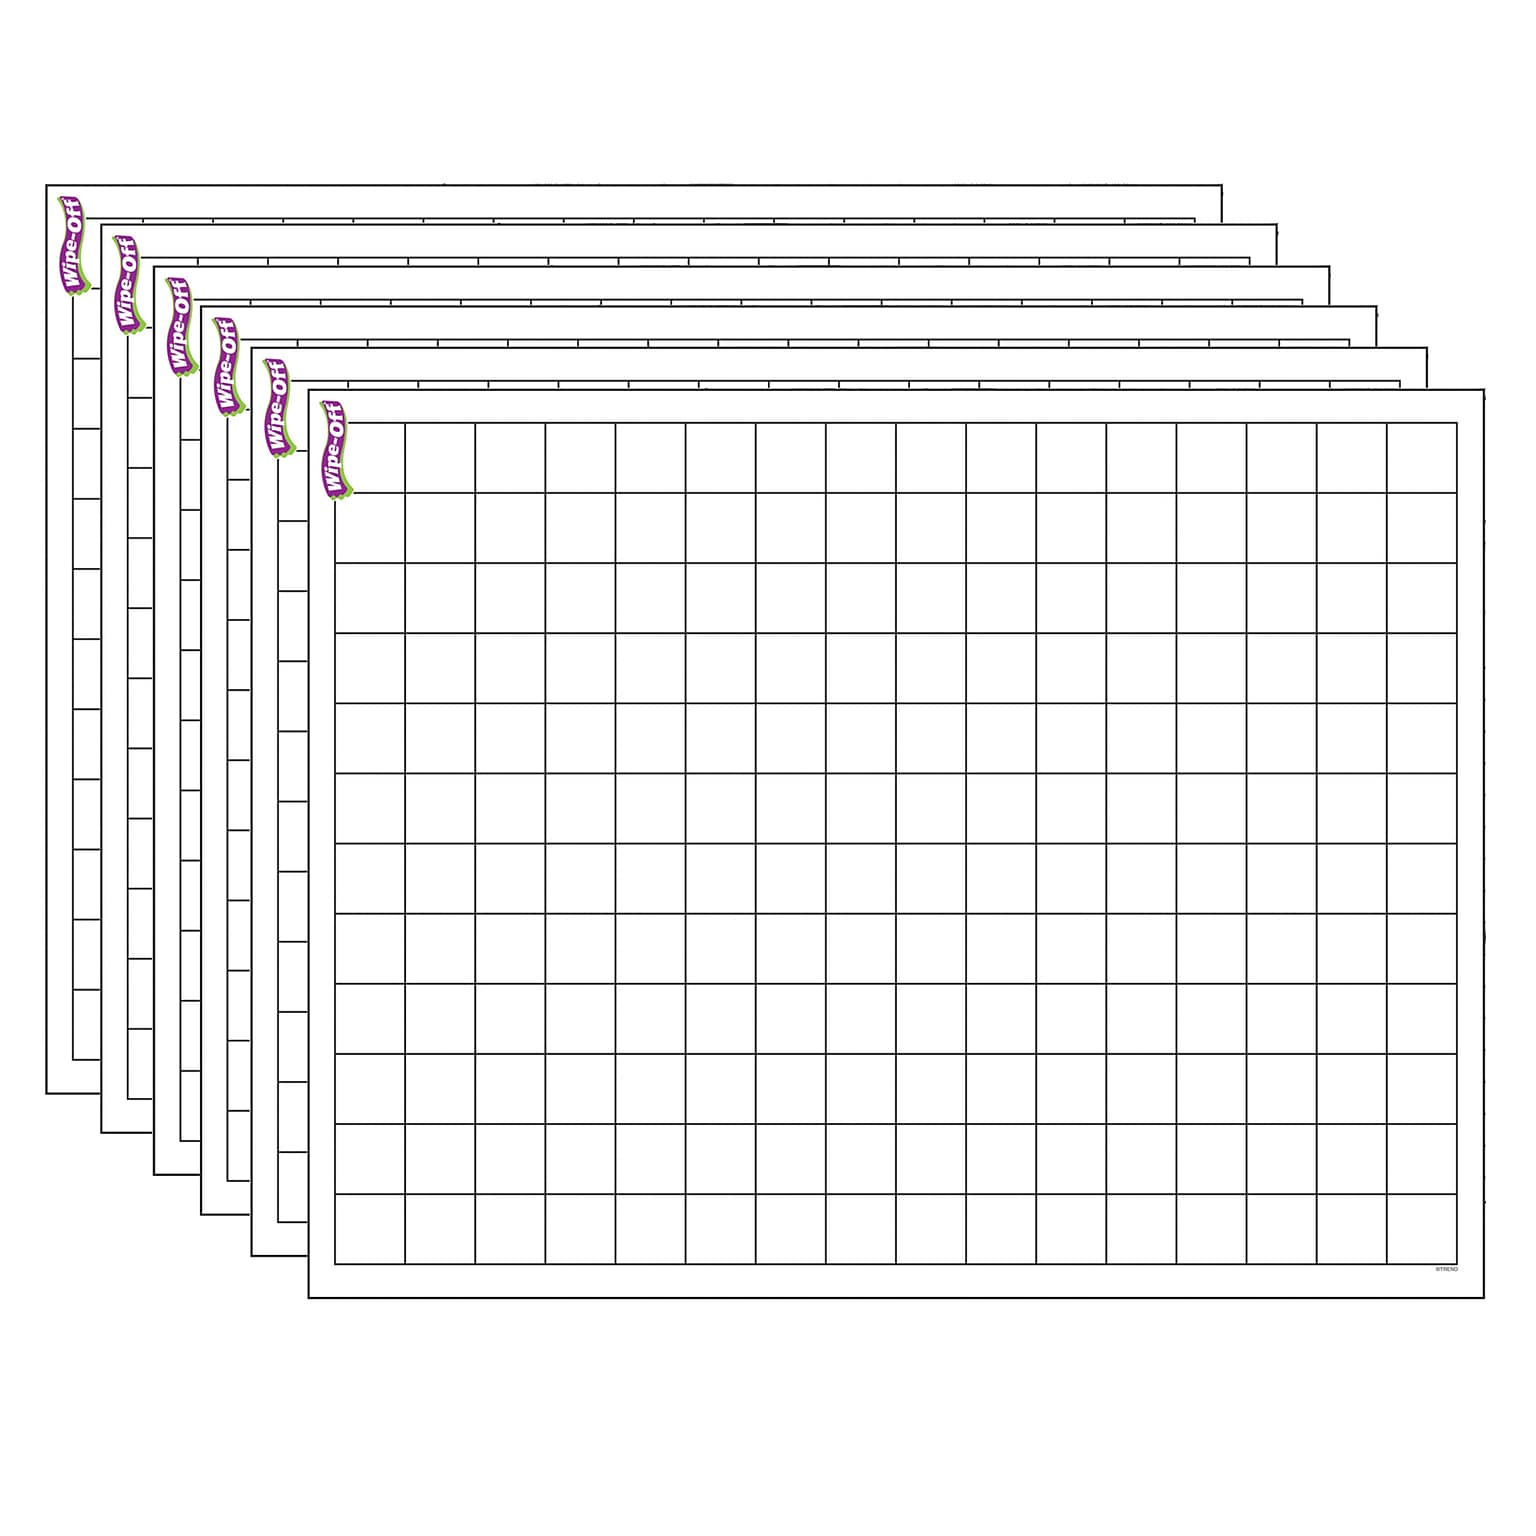 TREND Graphing Grid Small Squares Wipe-Off Chart, 17 x 22, Pack of 6 (T-27305-6)